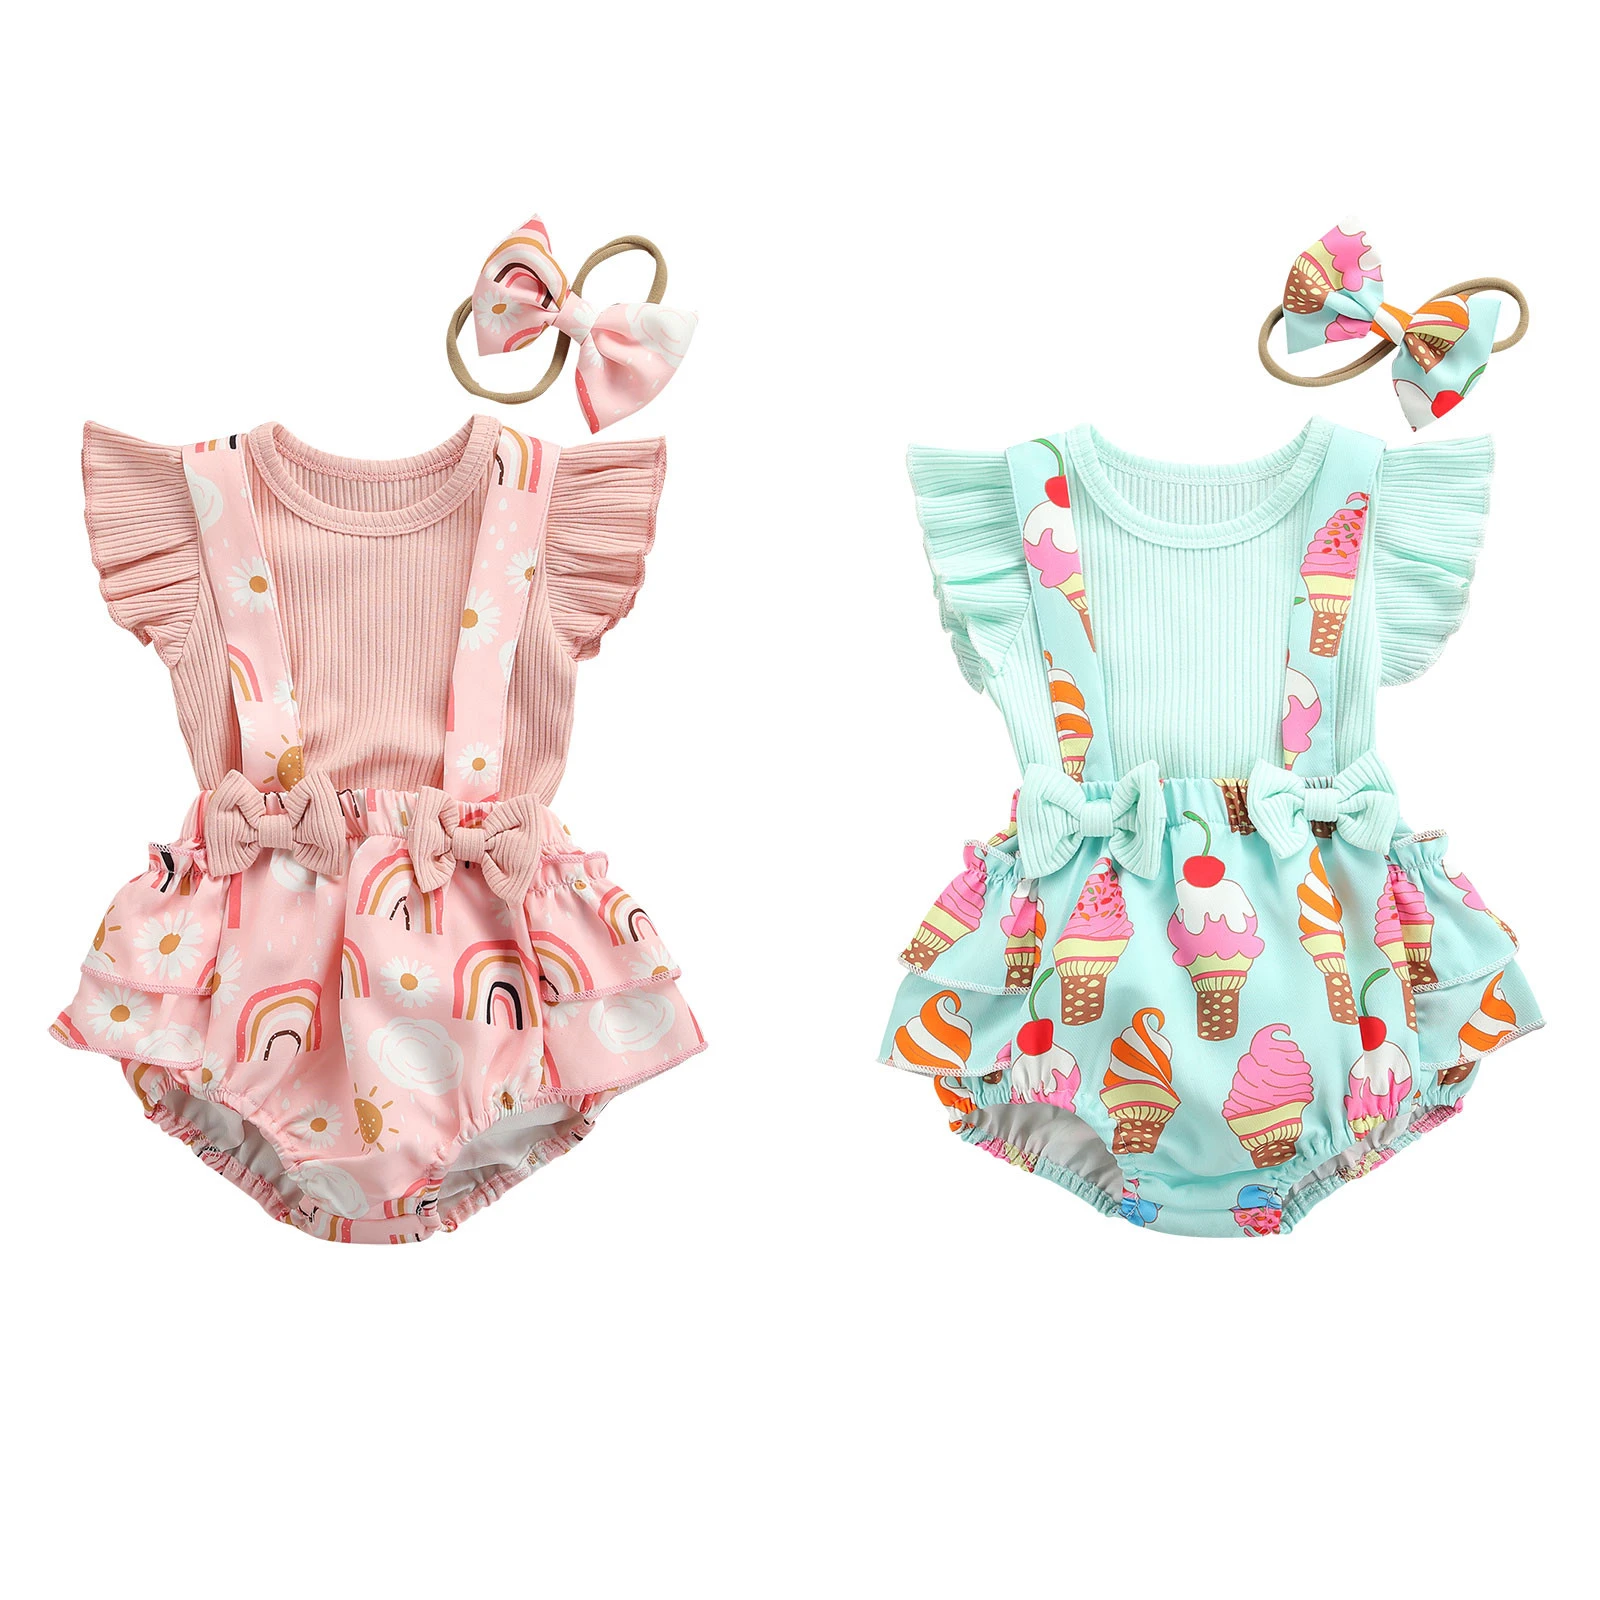 baby clothing set long sleeve	 2Pcs Baby Girls Summer Outfits Kids  Fly Sleeve Rib Knit Shirt Tops +Bow Suspender Skirt Set Icecream Printing Clothes baby outfit matching set